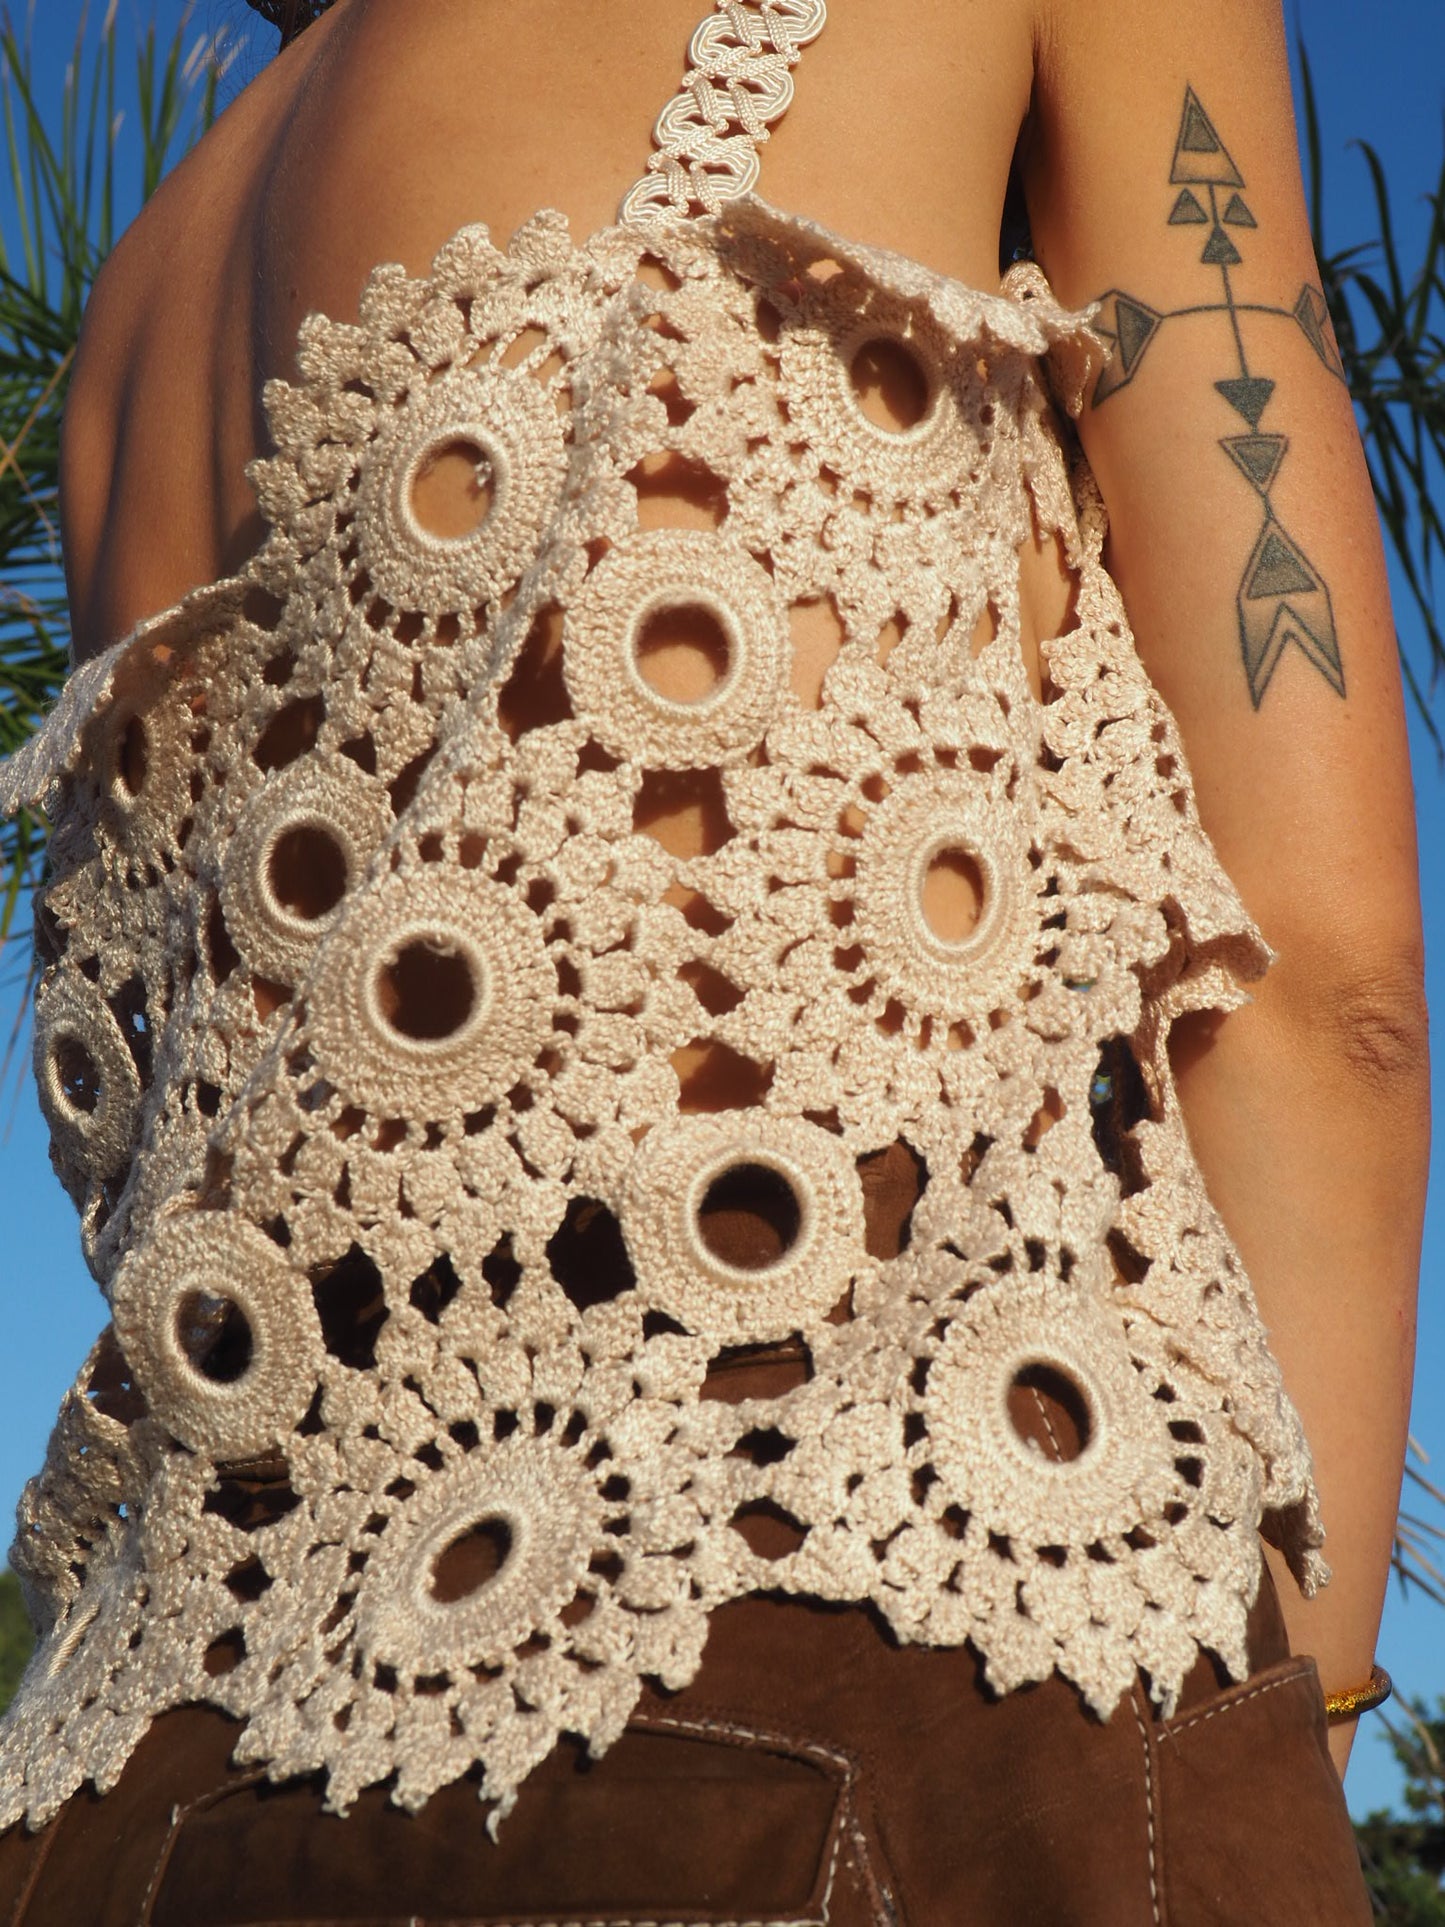 Antique Lace up-cycled crop top by Vagabond Ibiza